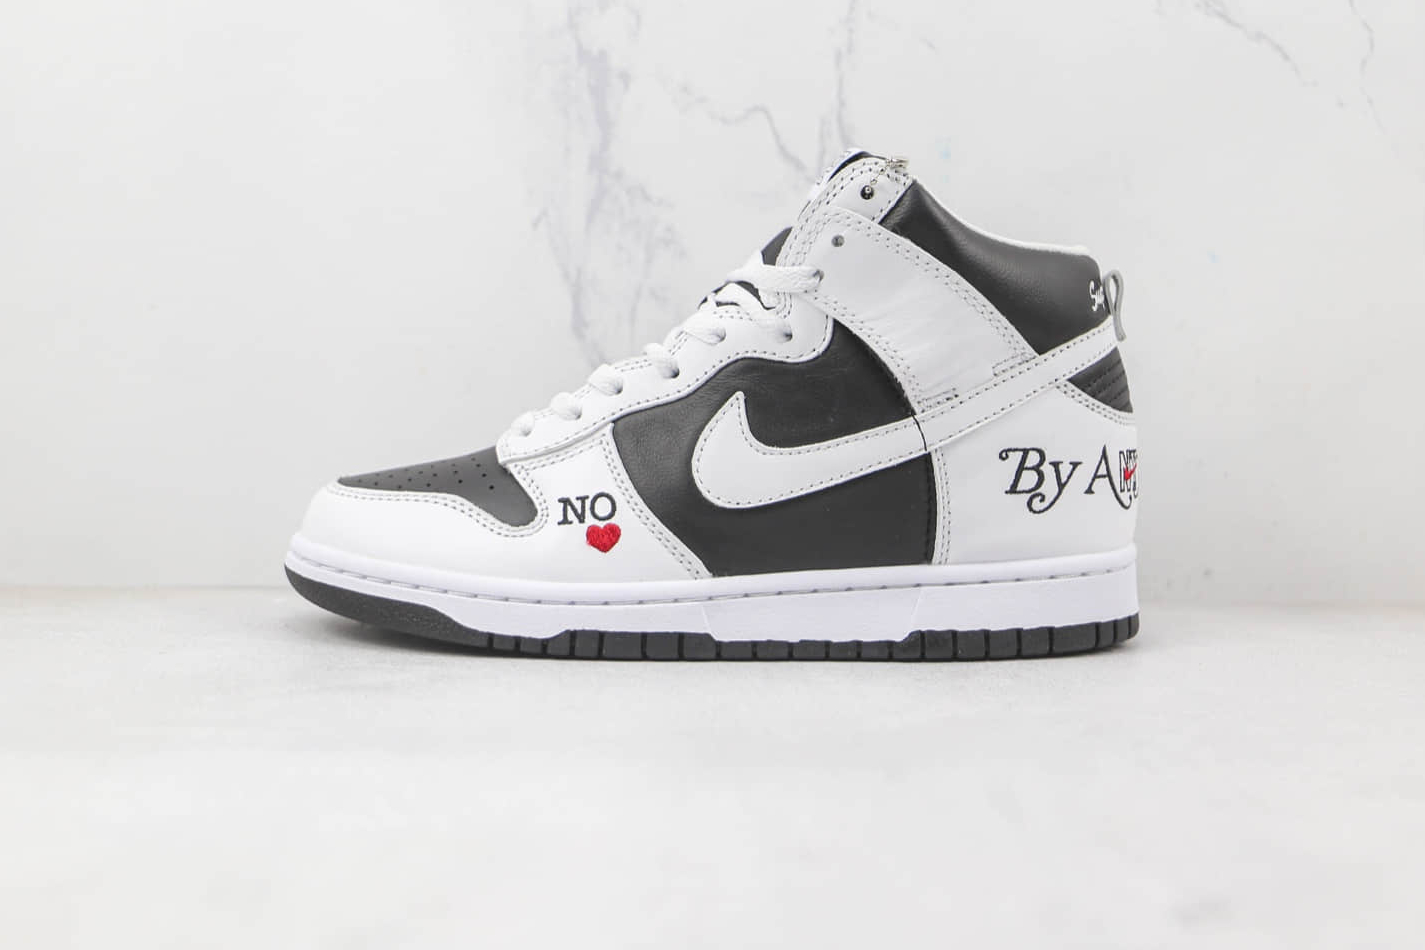 Nike Supreme x Dunk High SB 'By Any Means - Stormtrooper' DN3741-002 - Limited Edition Collaboration Footwear